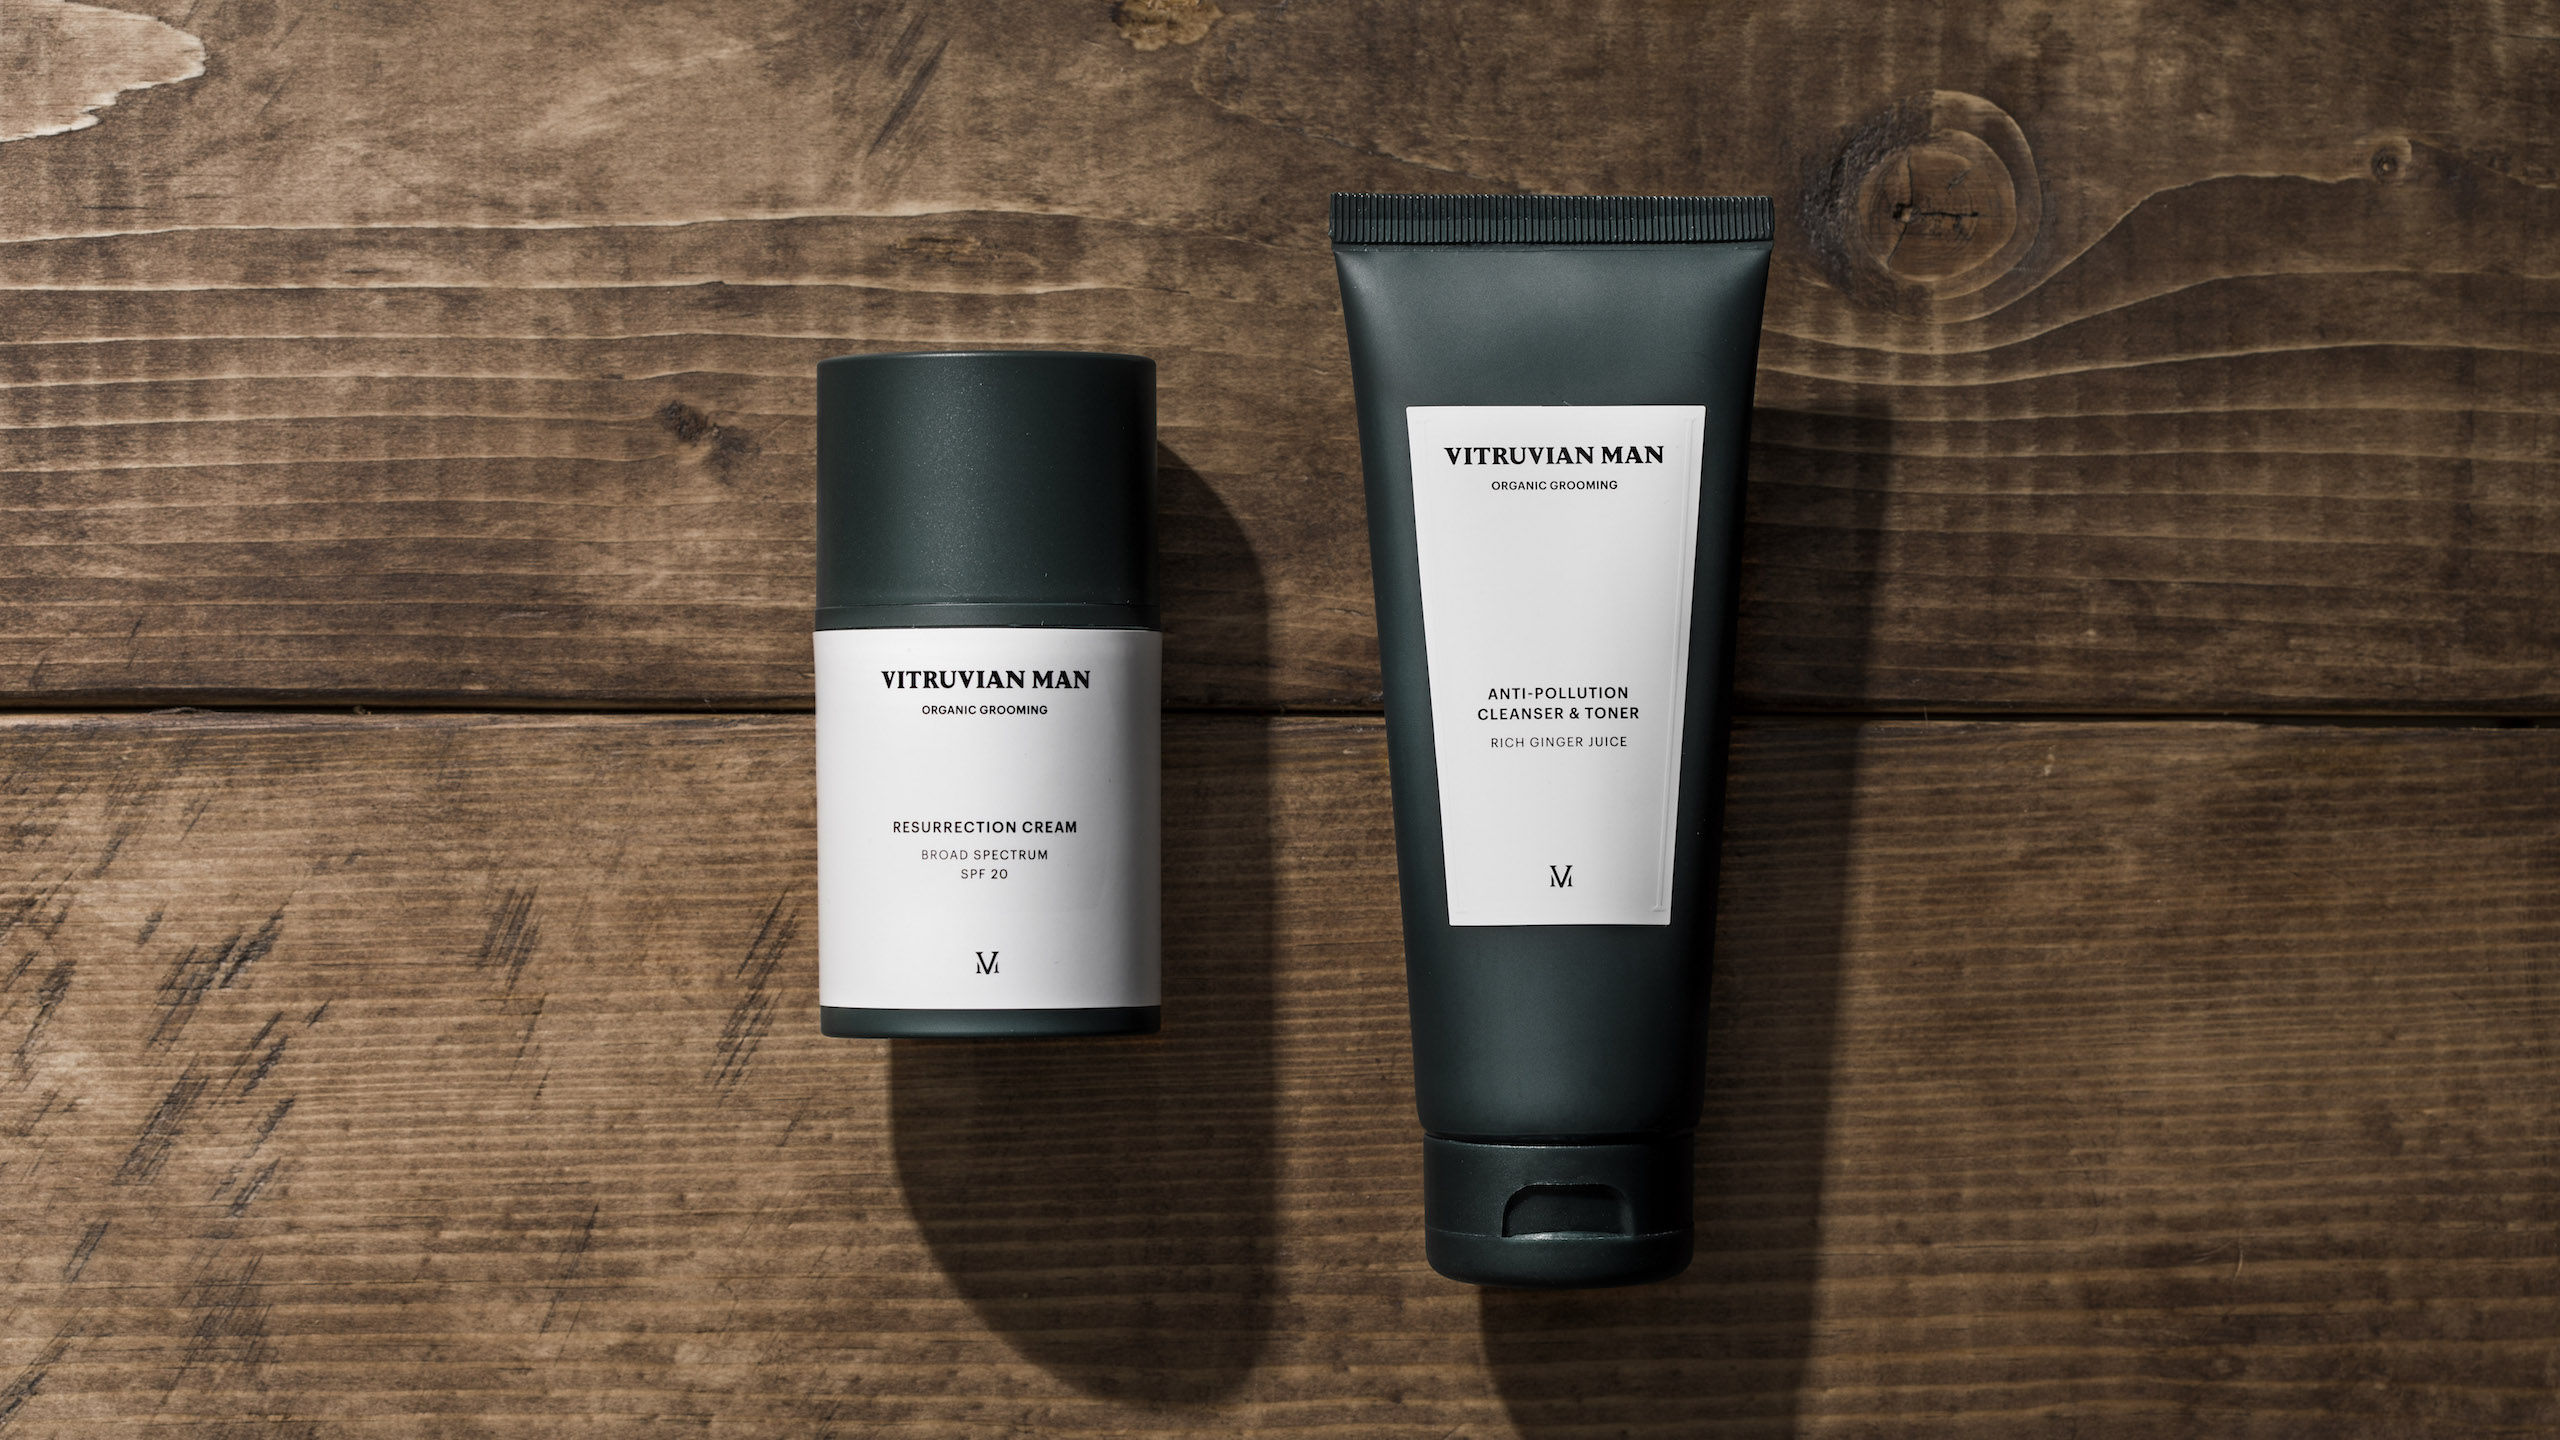 Introducing Vitruvian Man: Organic grooming solutions for the modern gent